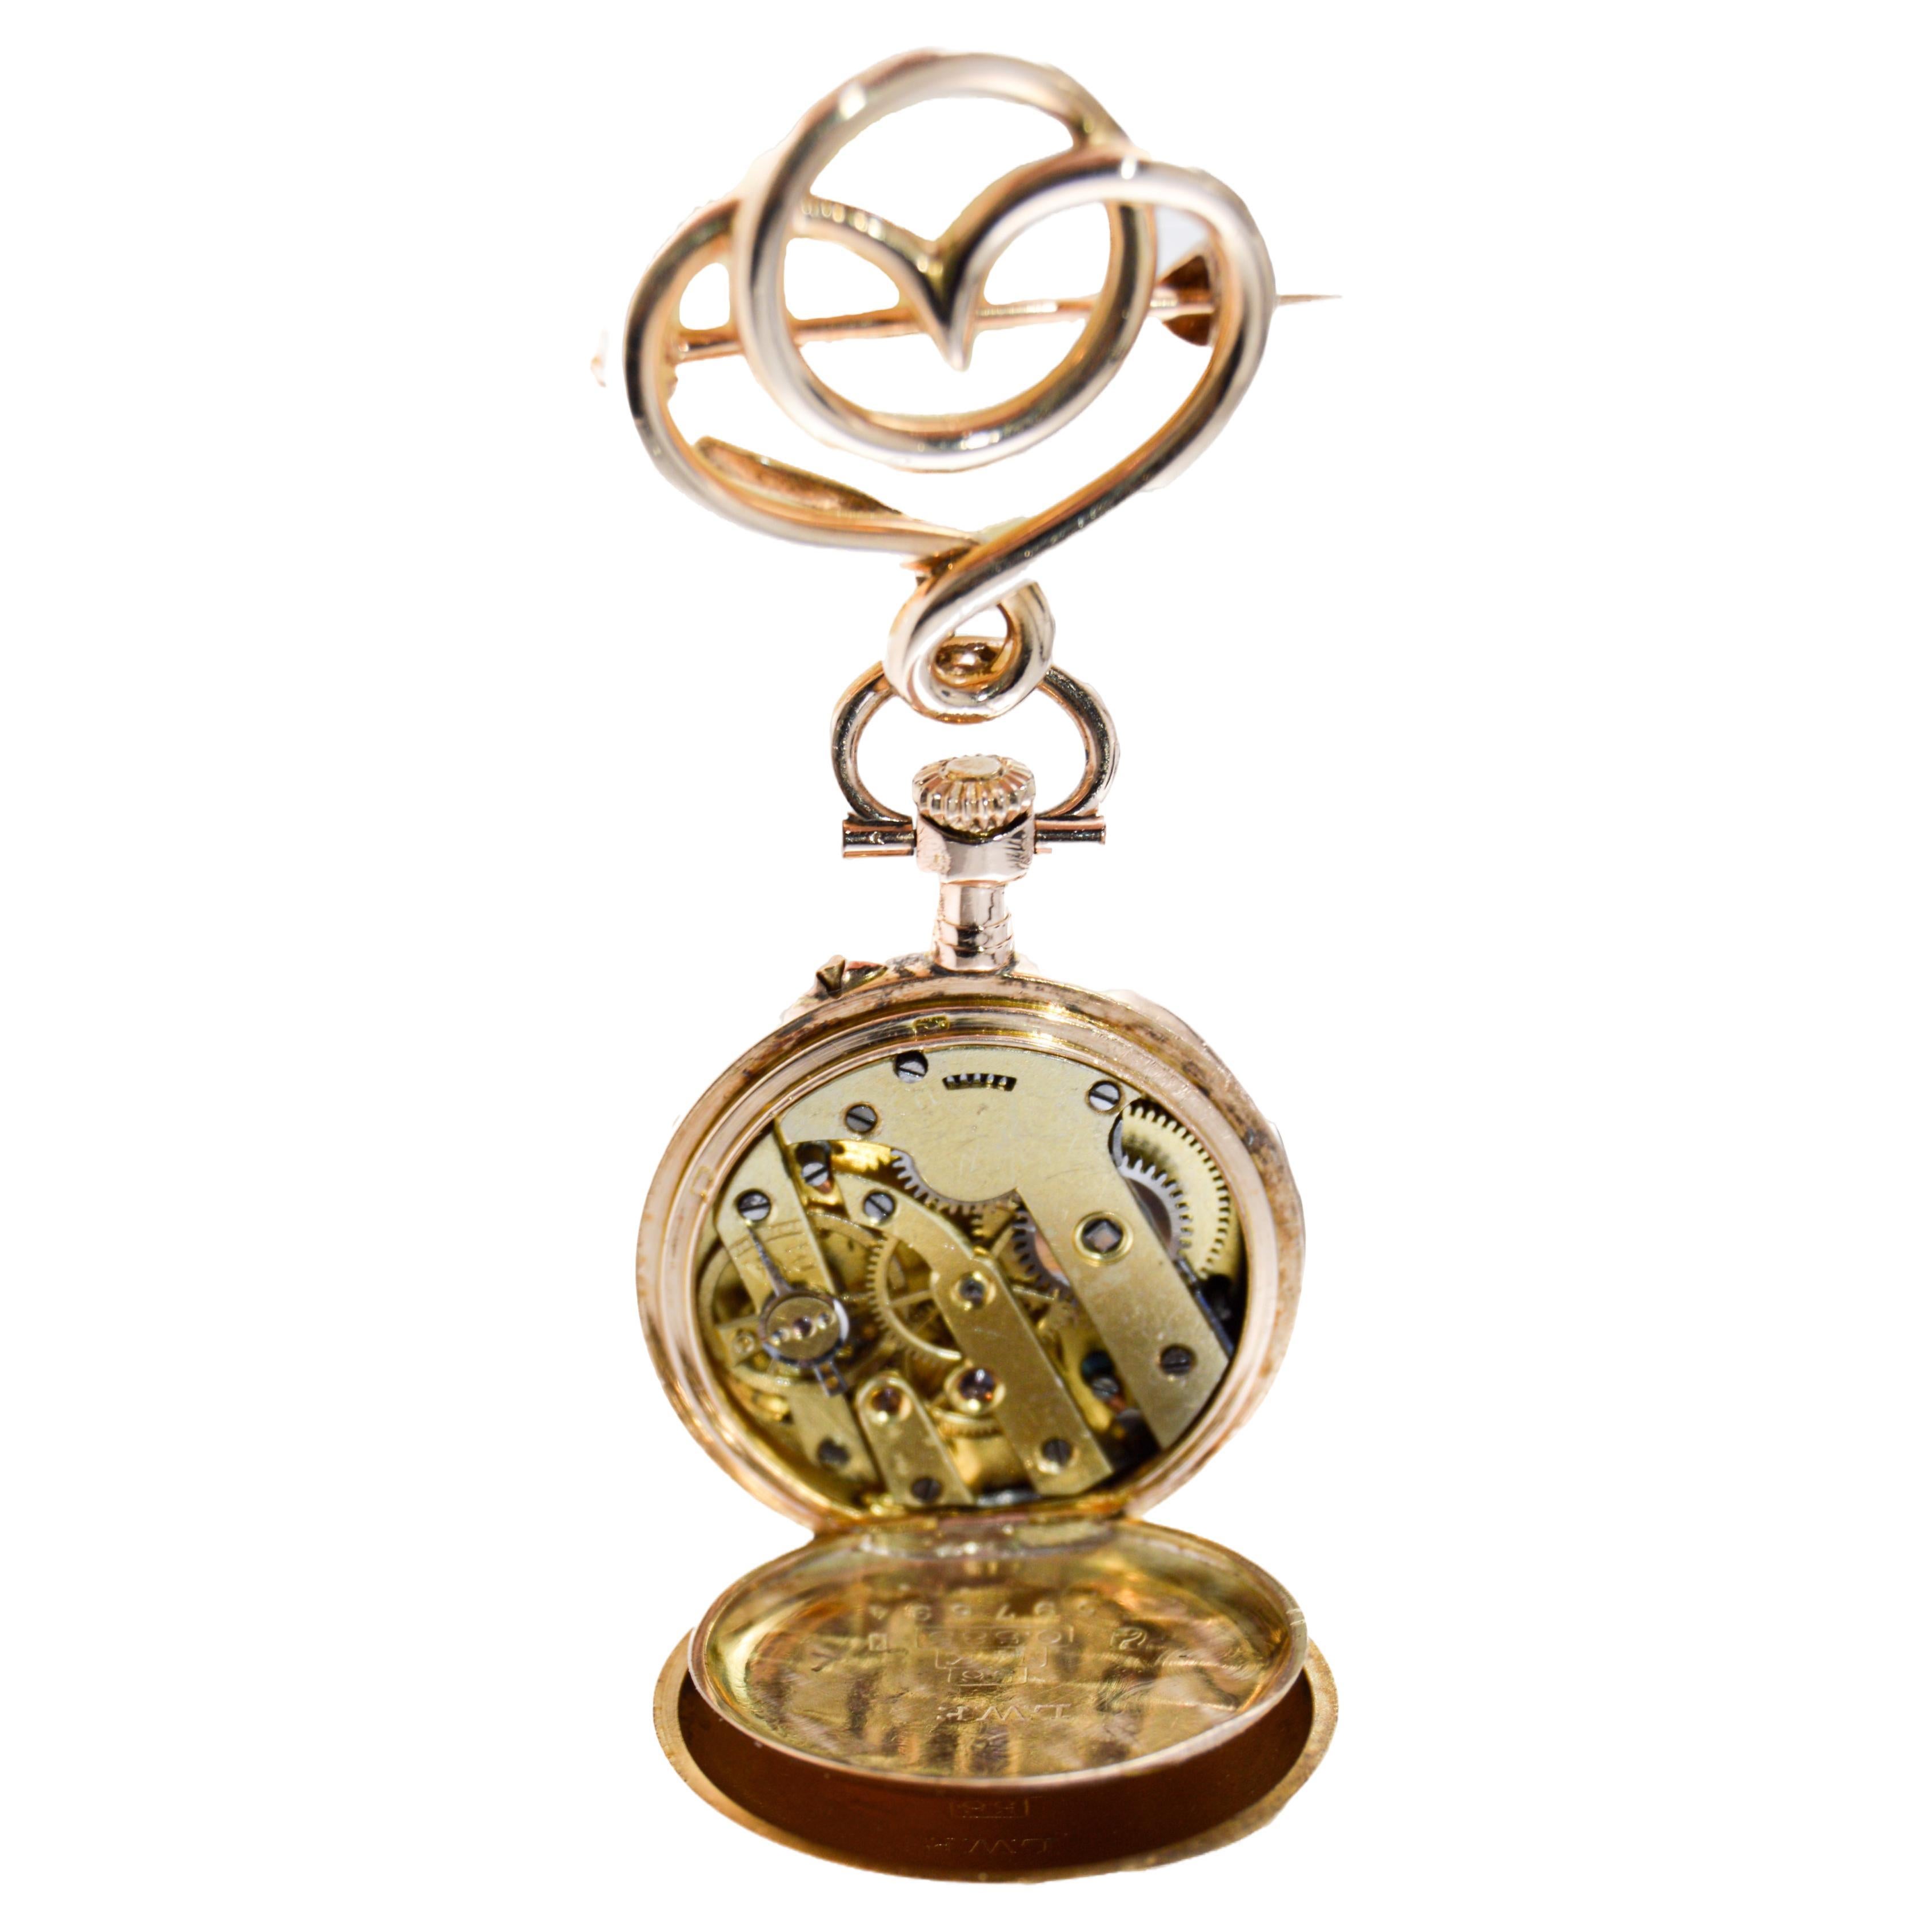 Champ de Roses 14Kt. Solid Gold Pendant Watch from 1900's 4